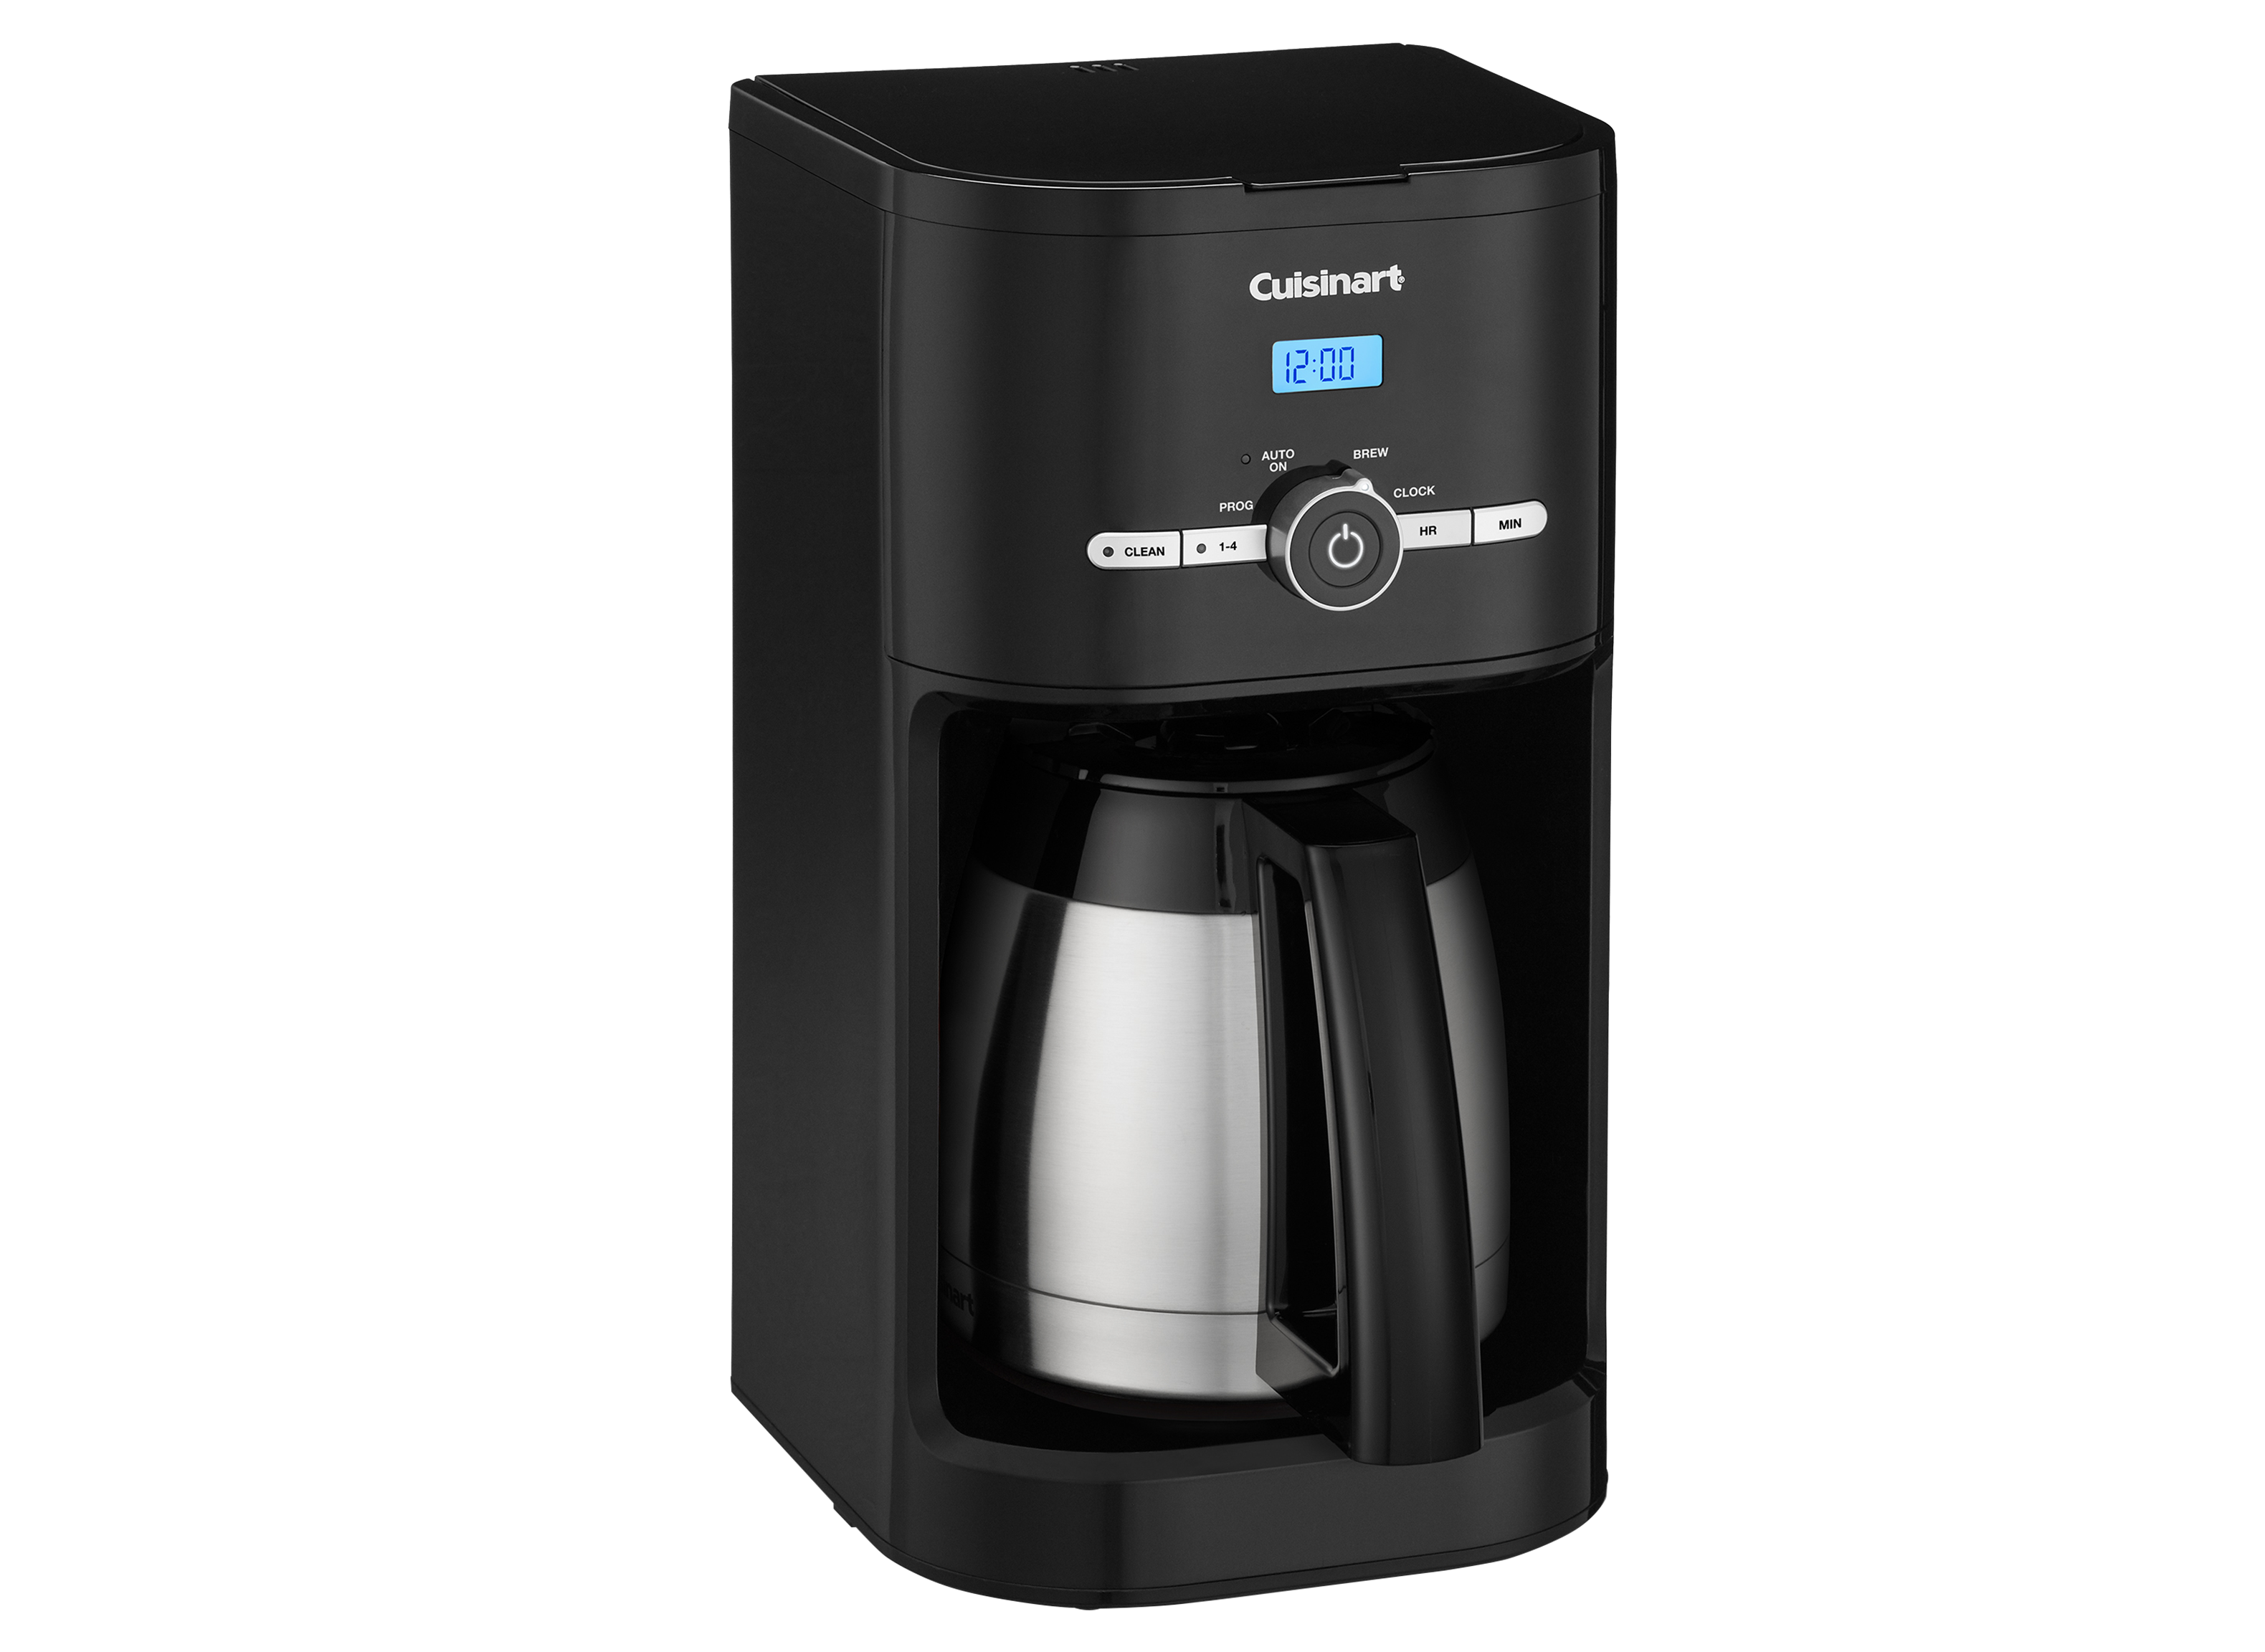 Cooks 10-Cup Thermal Coffeemaker Review, Price and Features